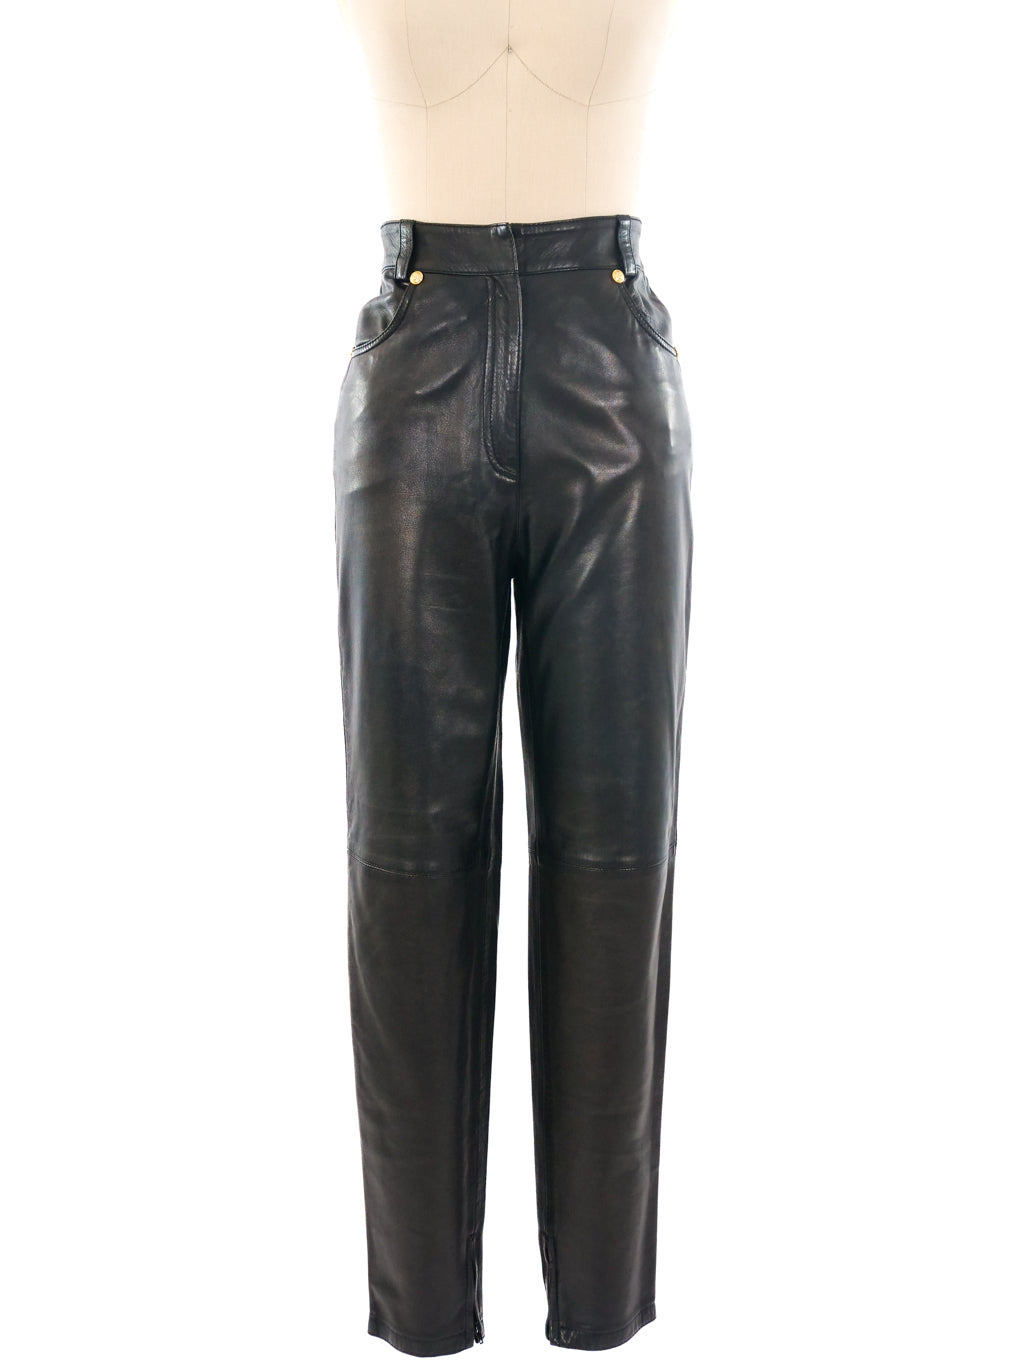 Gianni Versace Leather Pant